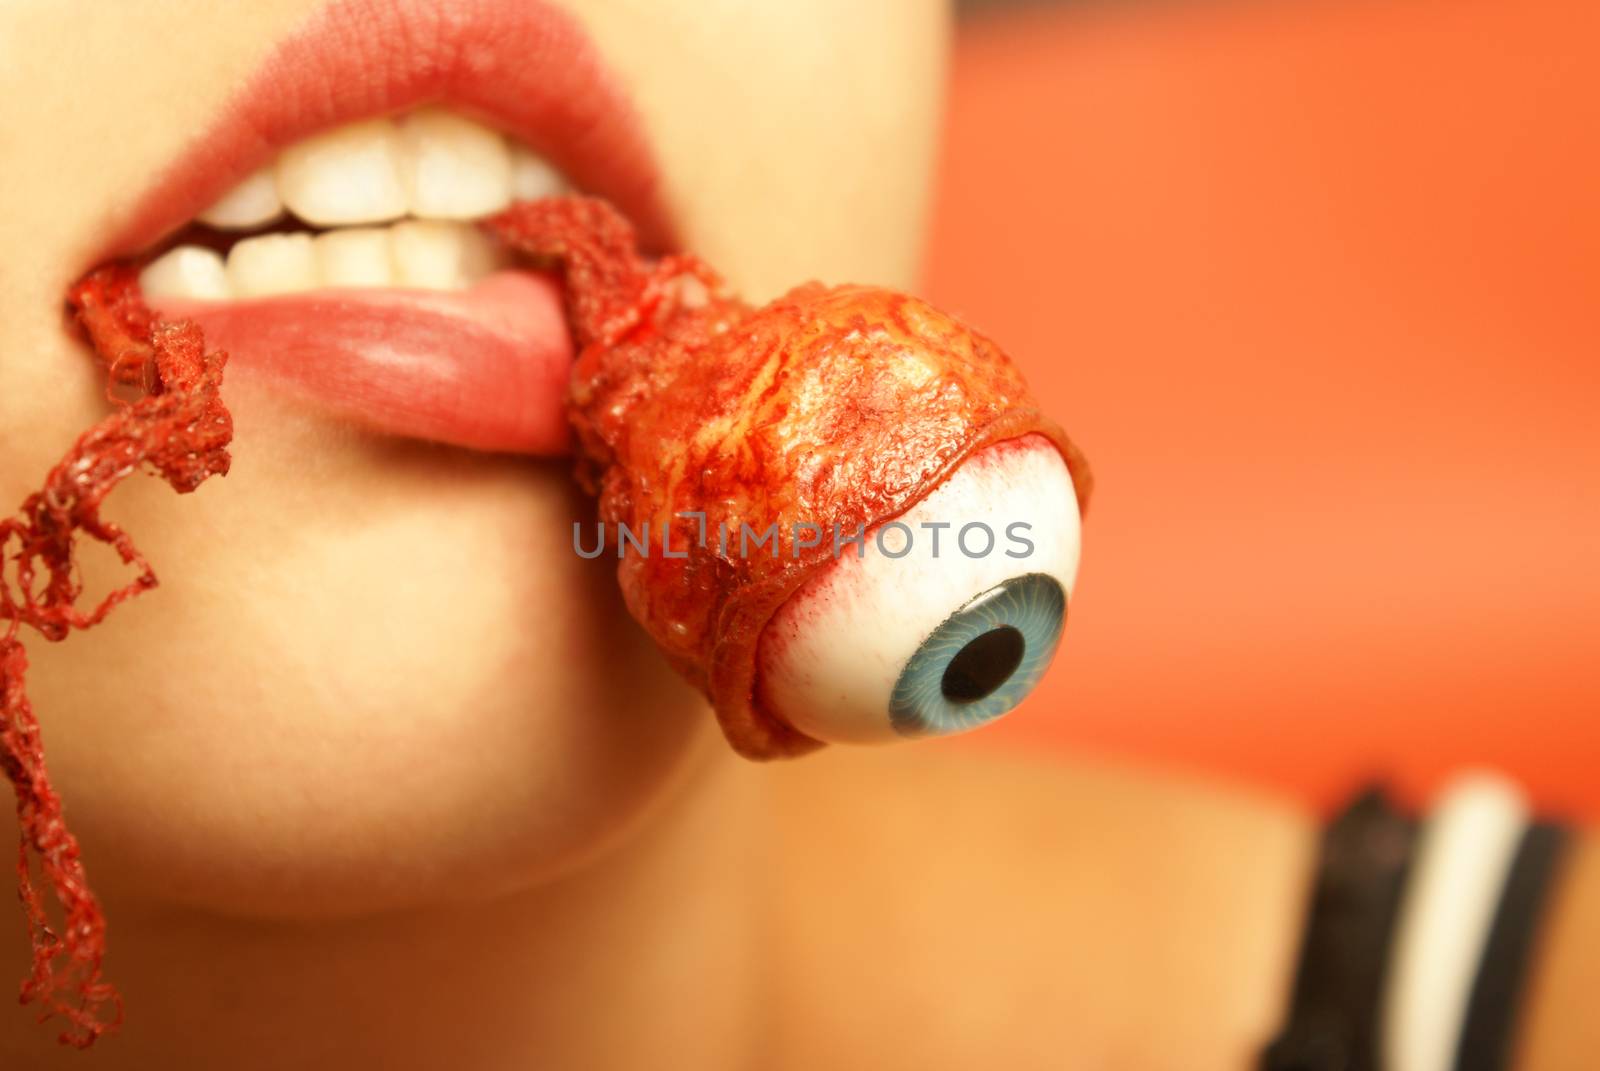 A woman takes a bite out of an eyeball.